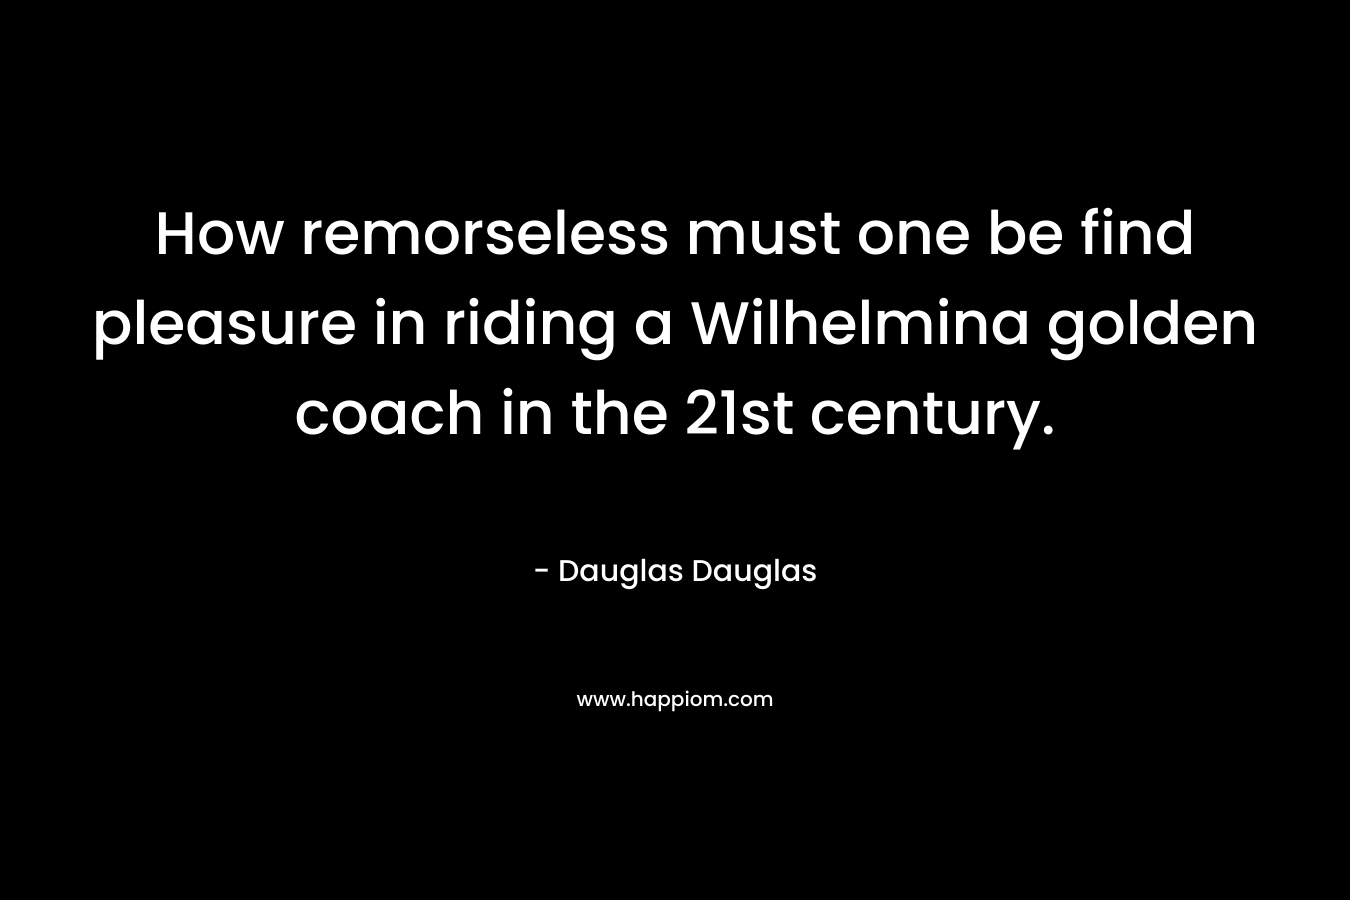 How remorseless must one be find pleasure in riding a Wilhelmina golden coach in the 21st century.